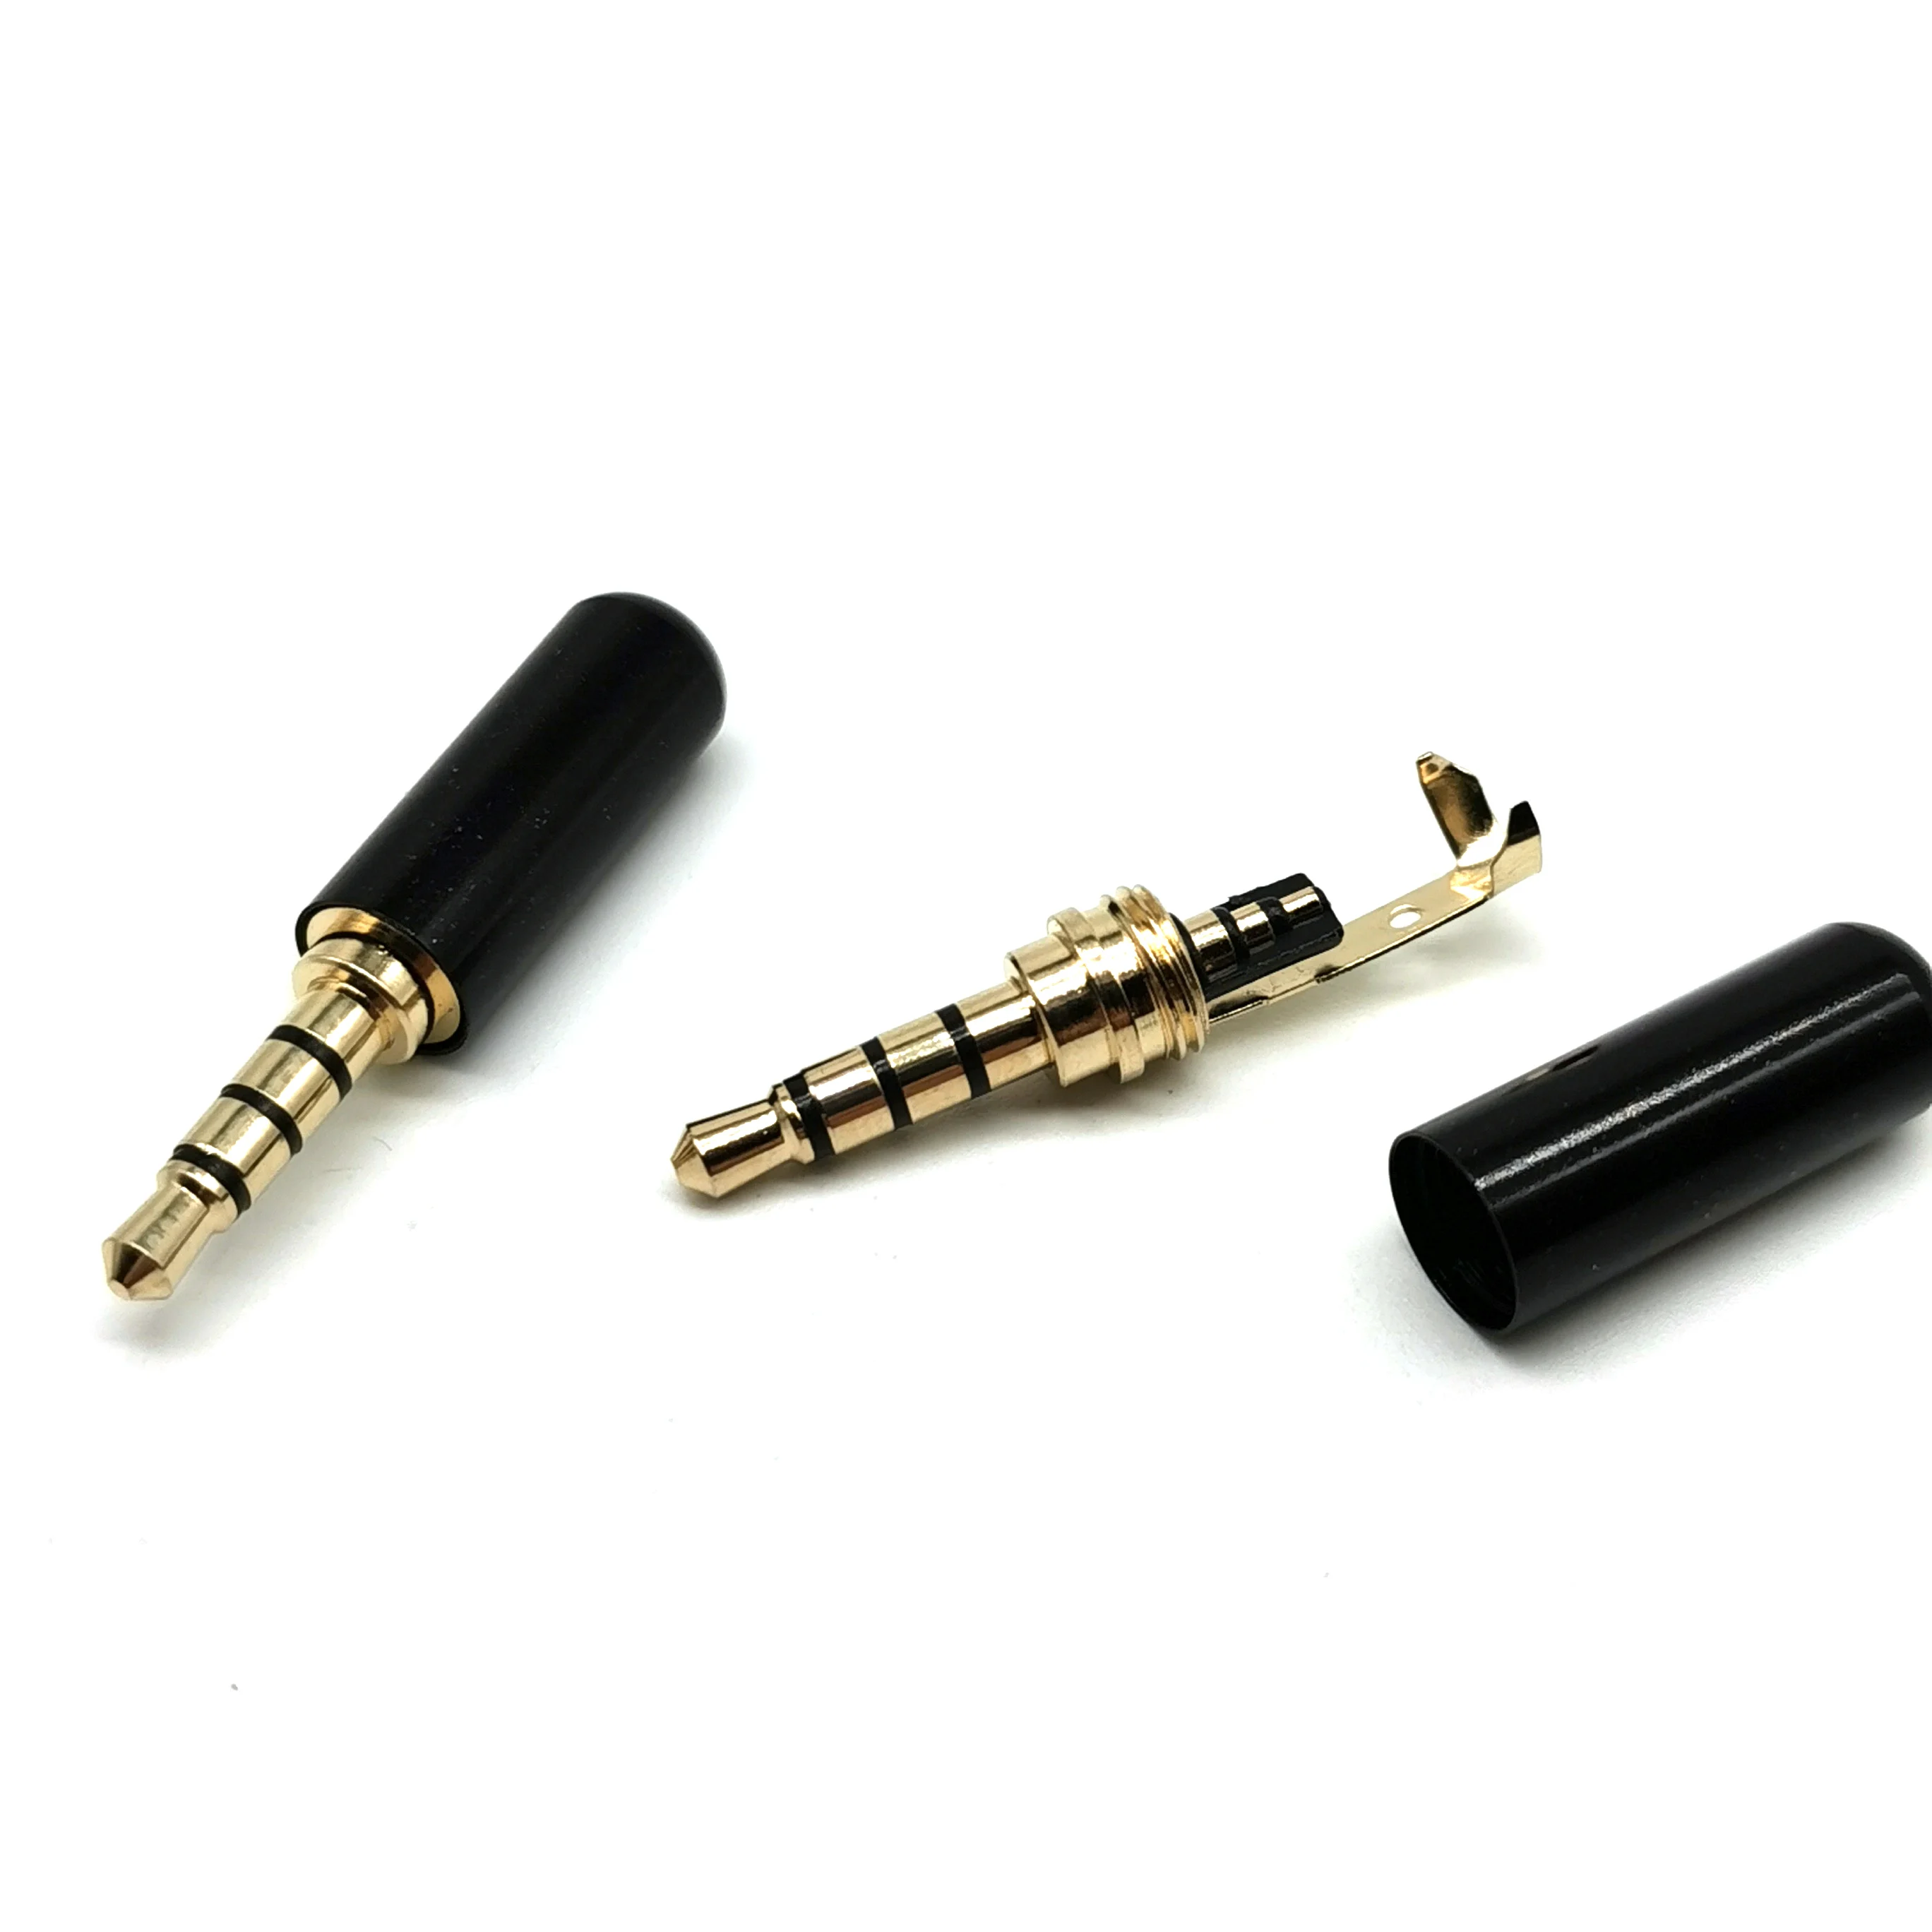 GOLD TRRS 4 PIN/POLE 3.5mm 1/8" JACK PLUG CONNECTOR REPLACE AUDIO/VIDEO/HEADSET